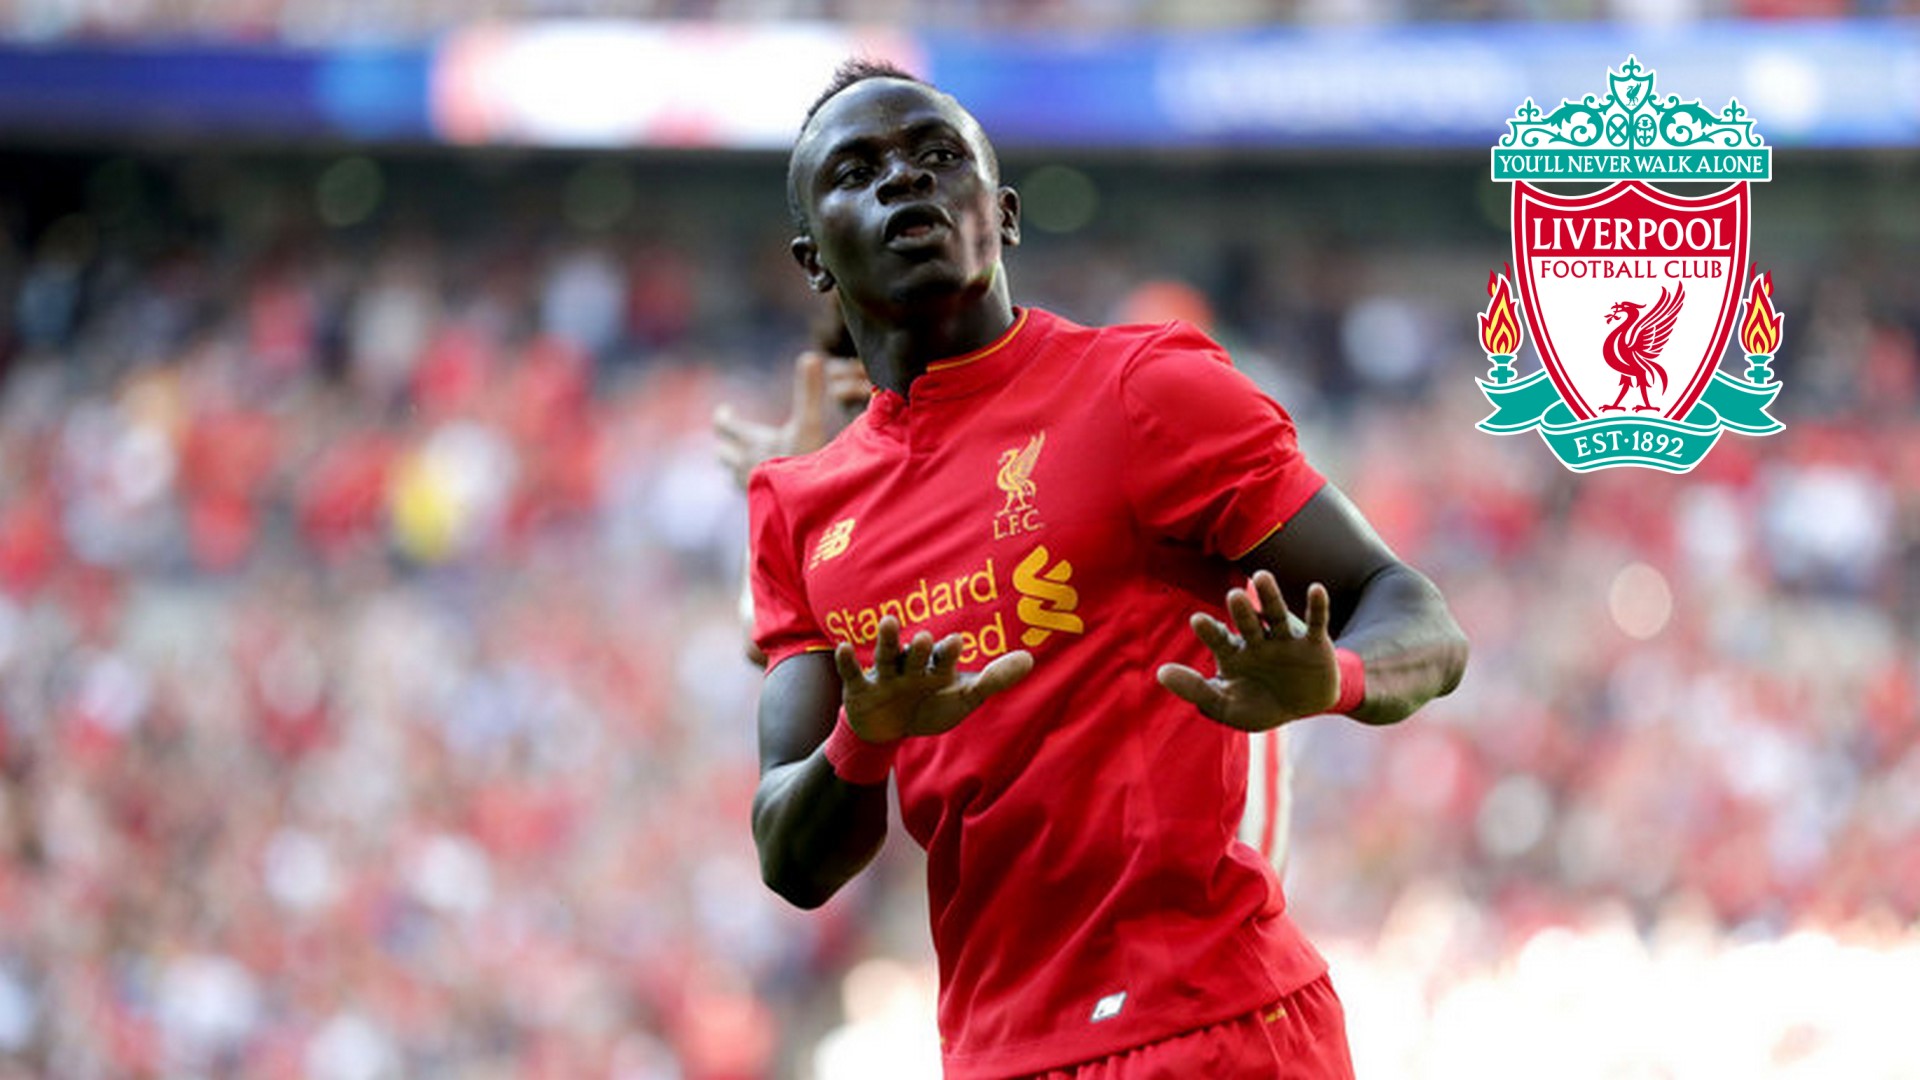 Sadio Mane Wallpaper HD with image resolution 1920x1080 pixel. You can make this wallpaper for your Desktop Computer Backgrounds, Mac Wallpapers, Android Lock screen or iPhone Screensavers